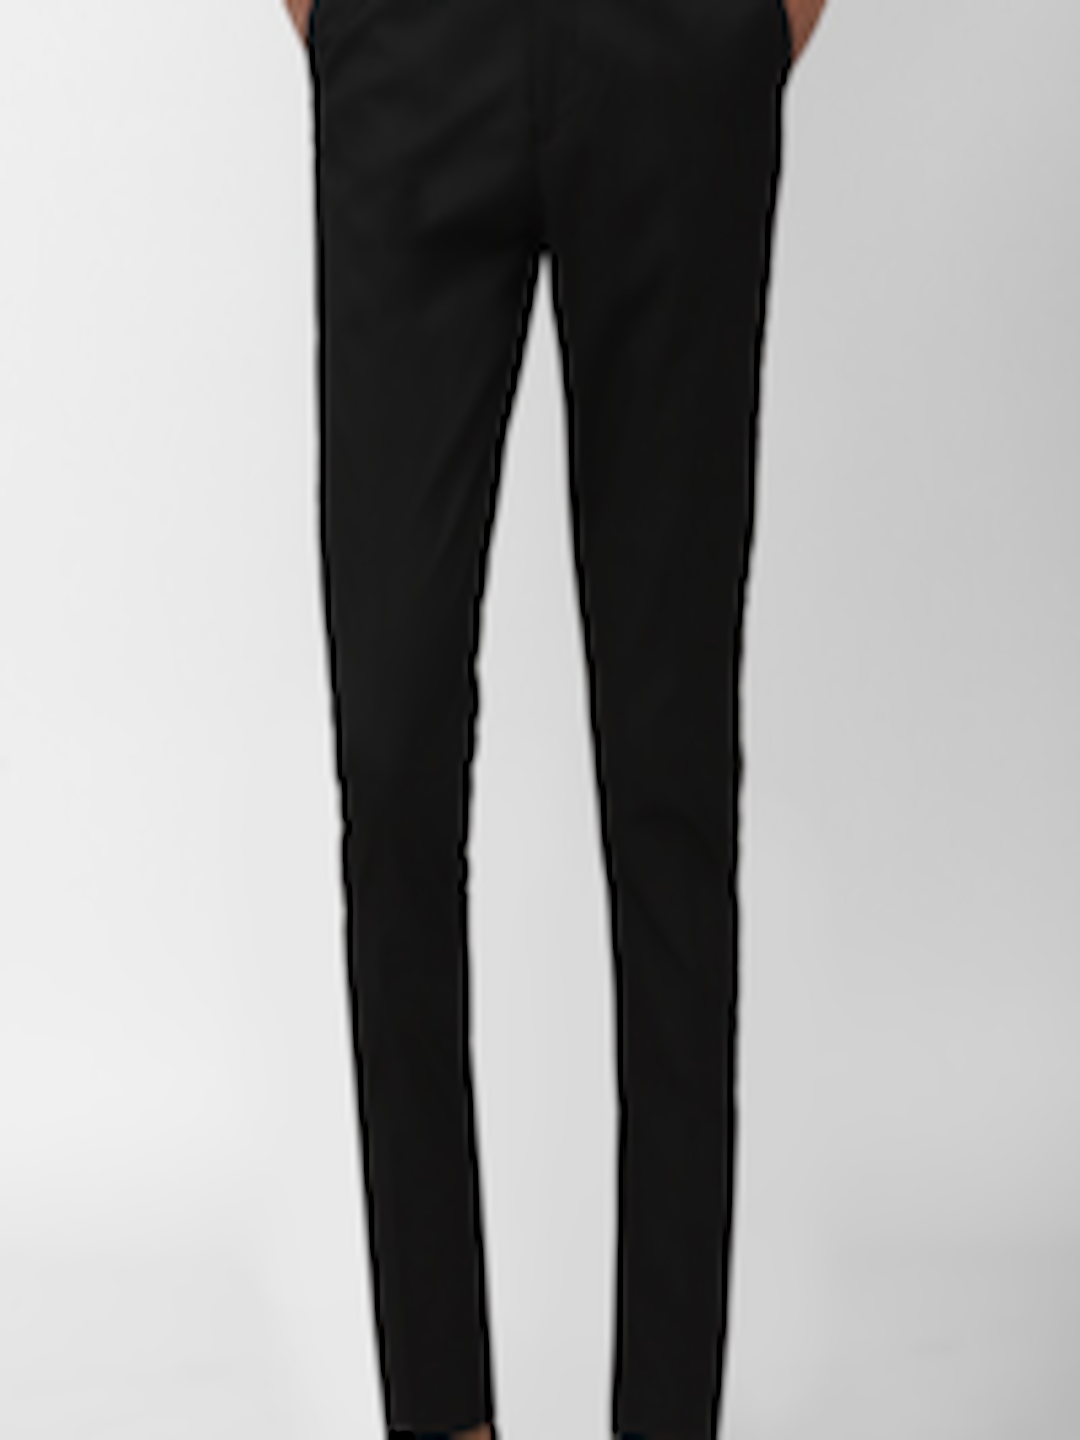 Buy Peter England Casuals Men Slim Fit Trousers - Trousers for Men ...